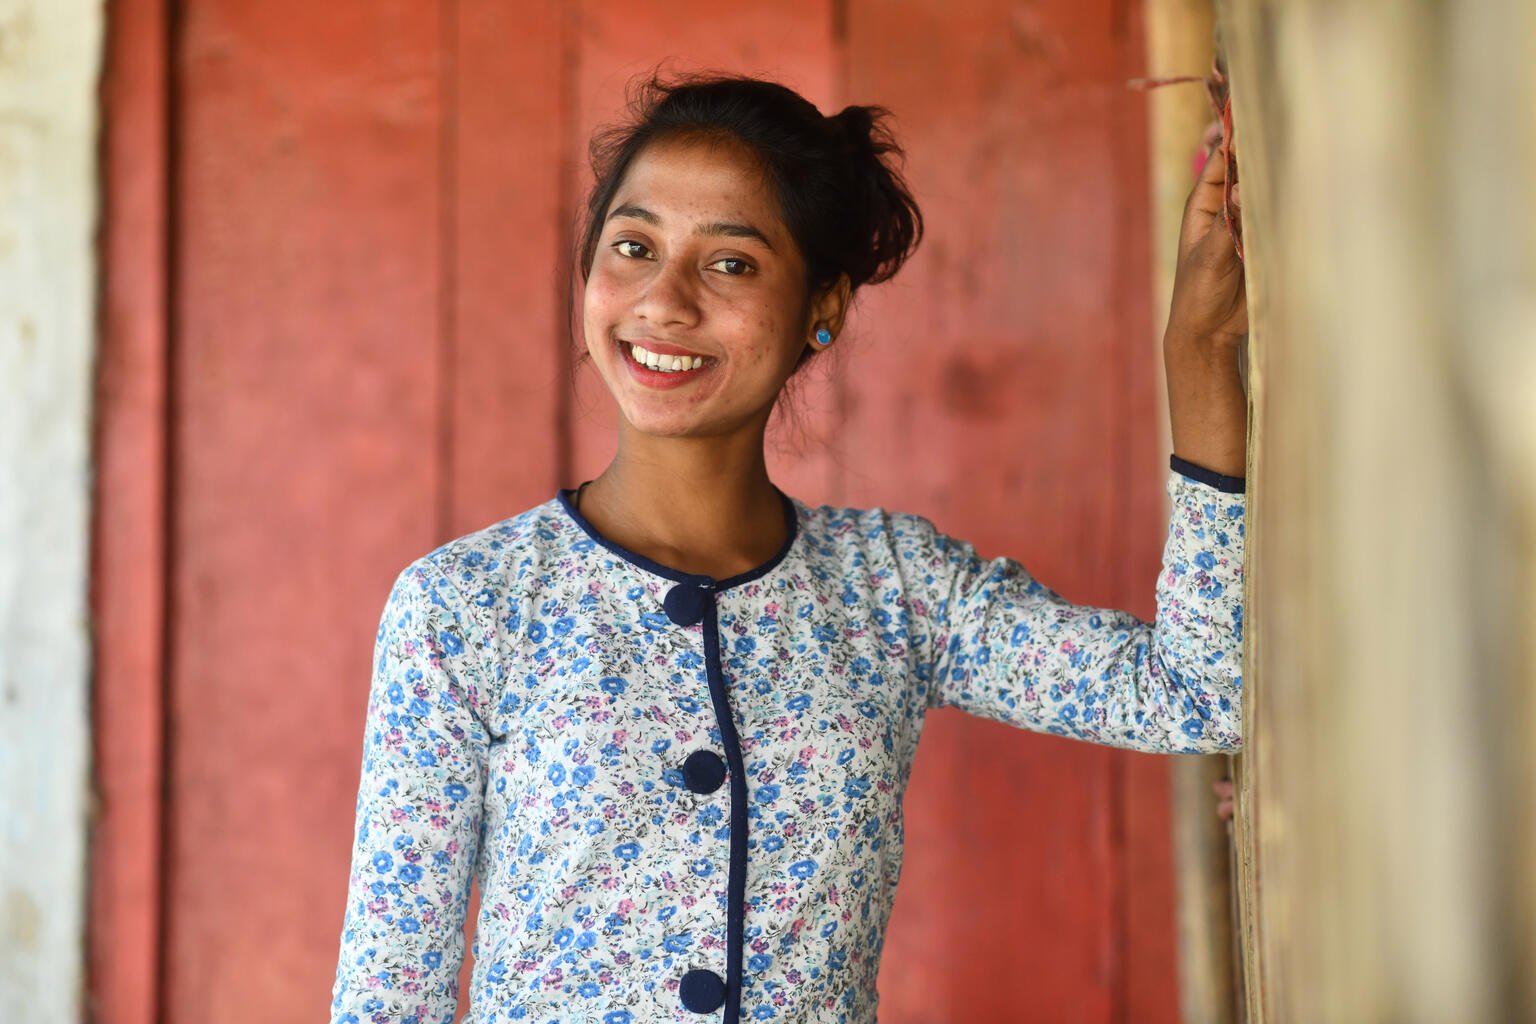 Supriya, 14, at her family home in Deohall Tea Estate, Tinsukia District, Assam, India. She is an active member of the community youth group, with an avid interest in safe water and good hygiene. Image: Biju Boro/UNICEF